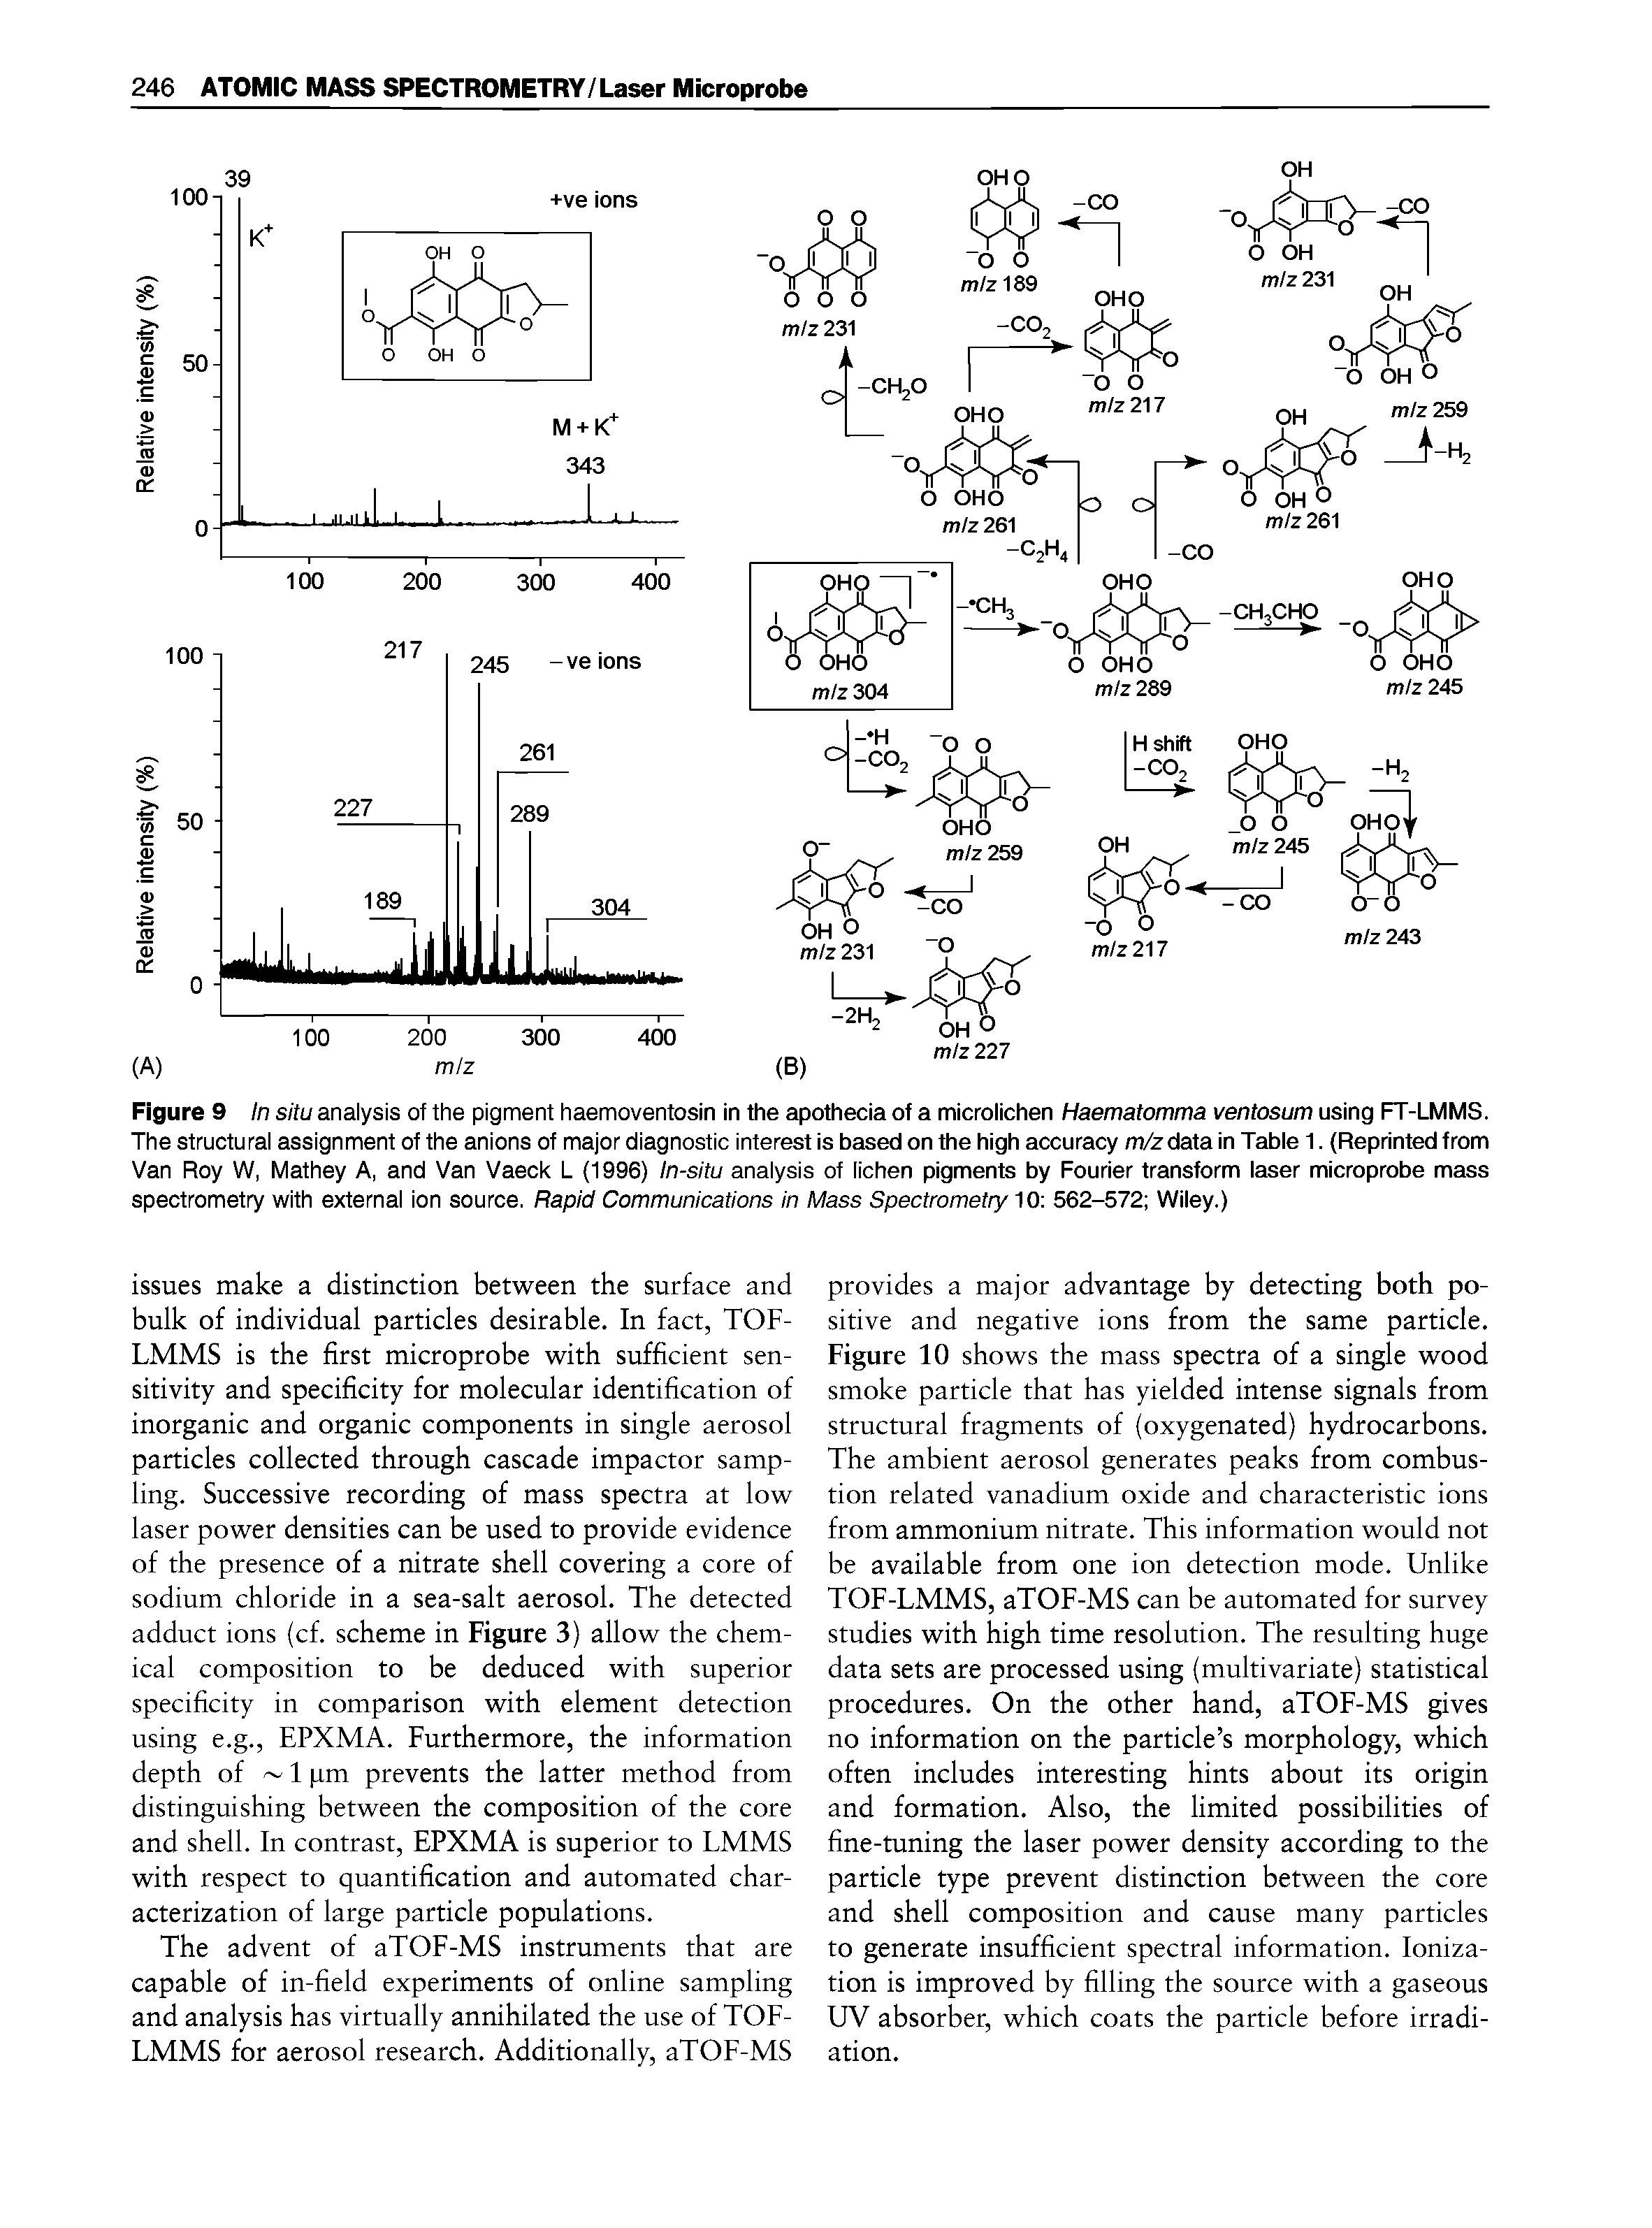 Figure 9 In situ analysis of the pigment haemoventosin in the apothecia of a microlichen Haematomma ventosum using FT-LMMS. The structural assignment of the anions of major diagnostic interest is based on the high accuracy m/z data in Table 1. (Reprinted from Van Roy W, Mathey A, and Van Vaeck L (1996) In-situ analysis of lichen pigments by Fourier transform laser microprobe mass spectrometry with external ion source. Rapid Communications in Mass Spectrometry 10 562-572 Wiley.)...